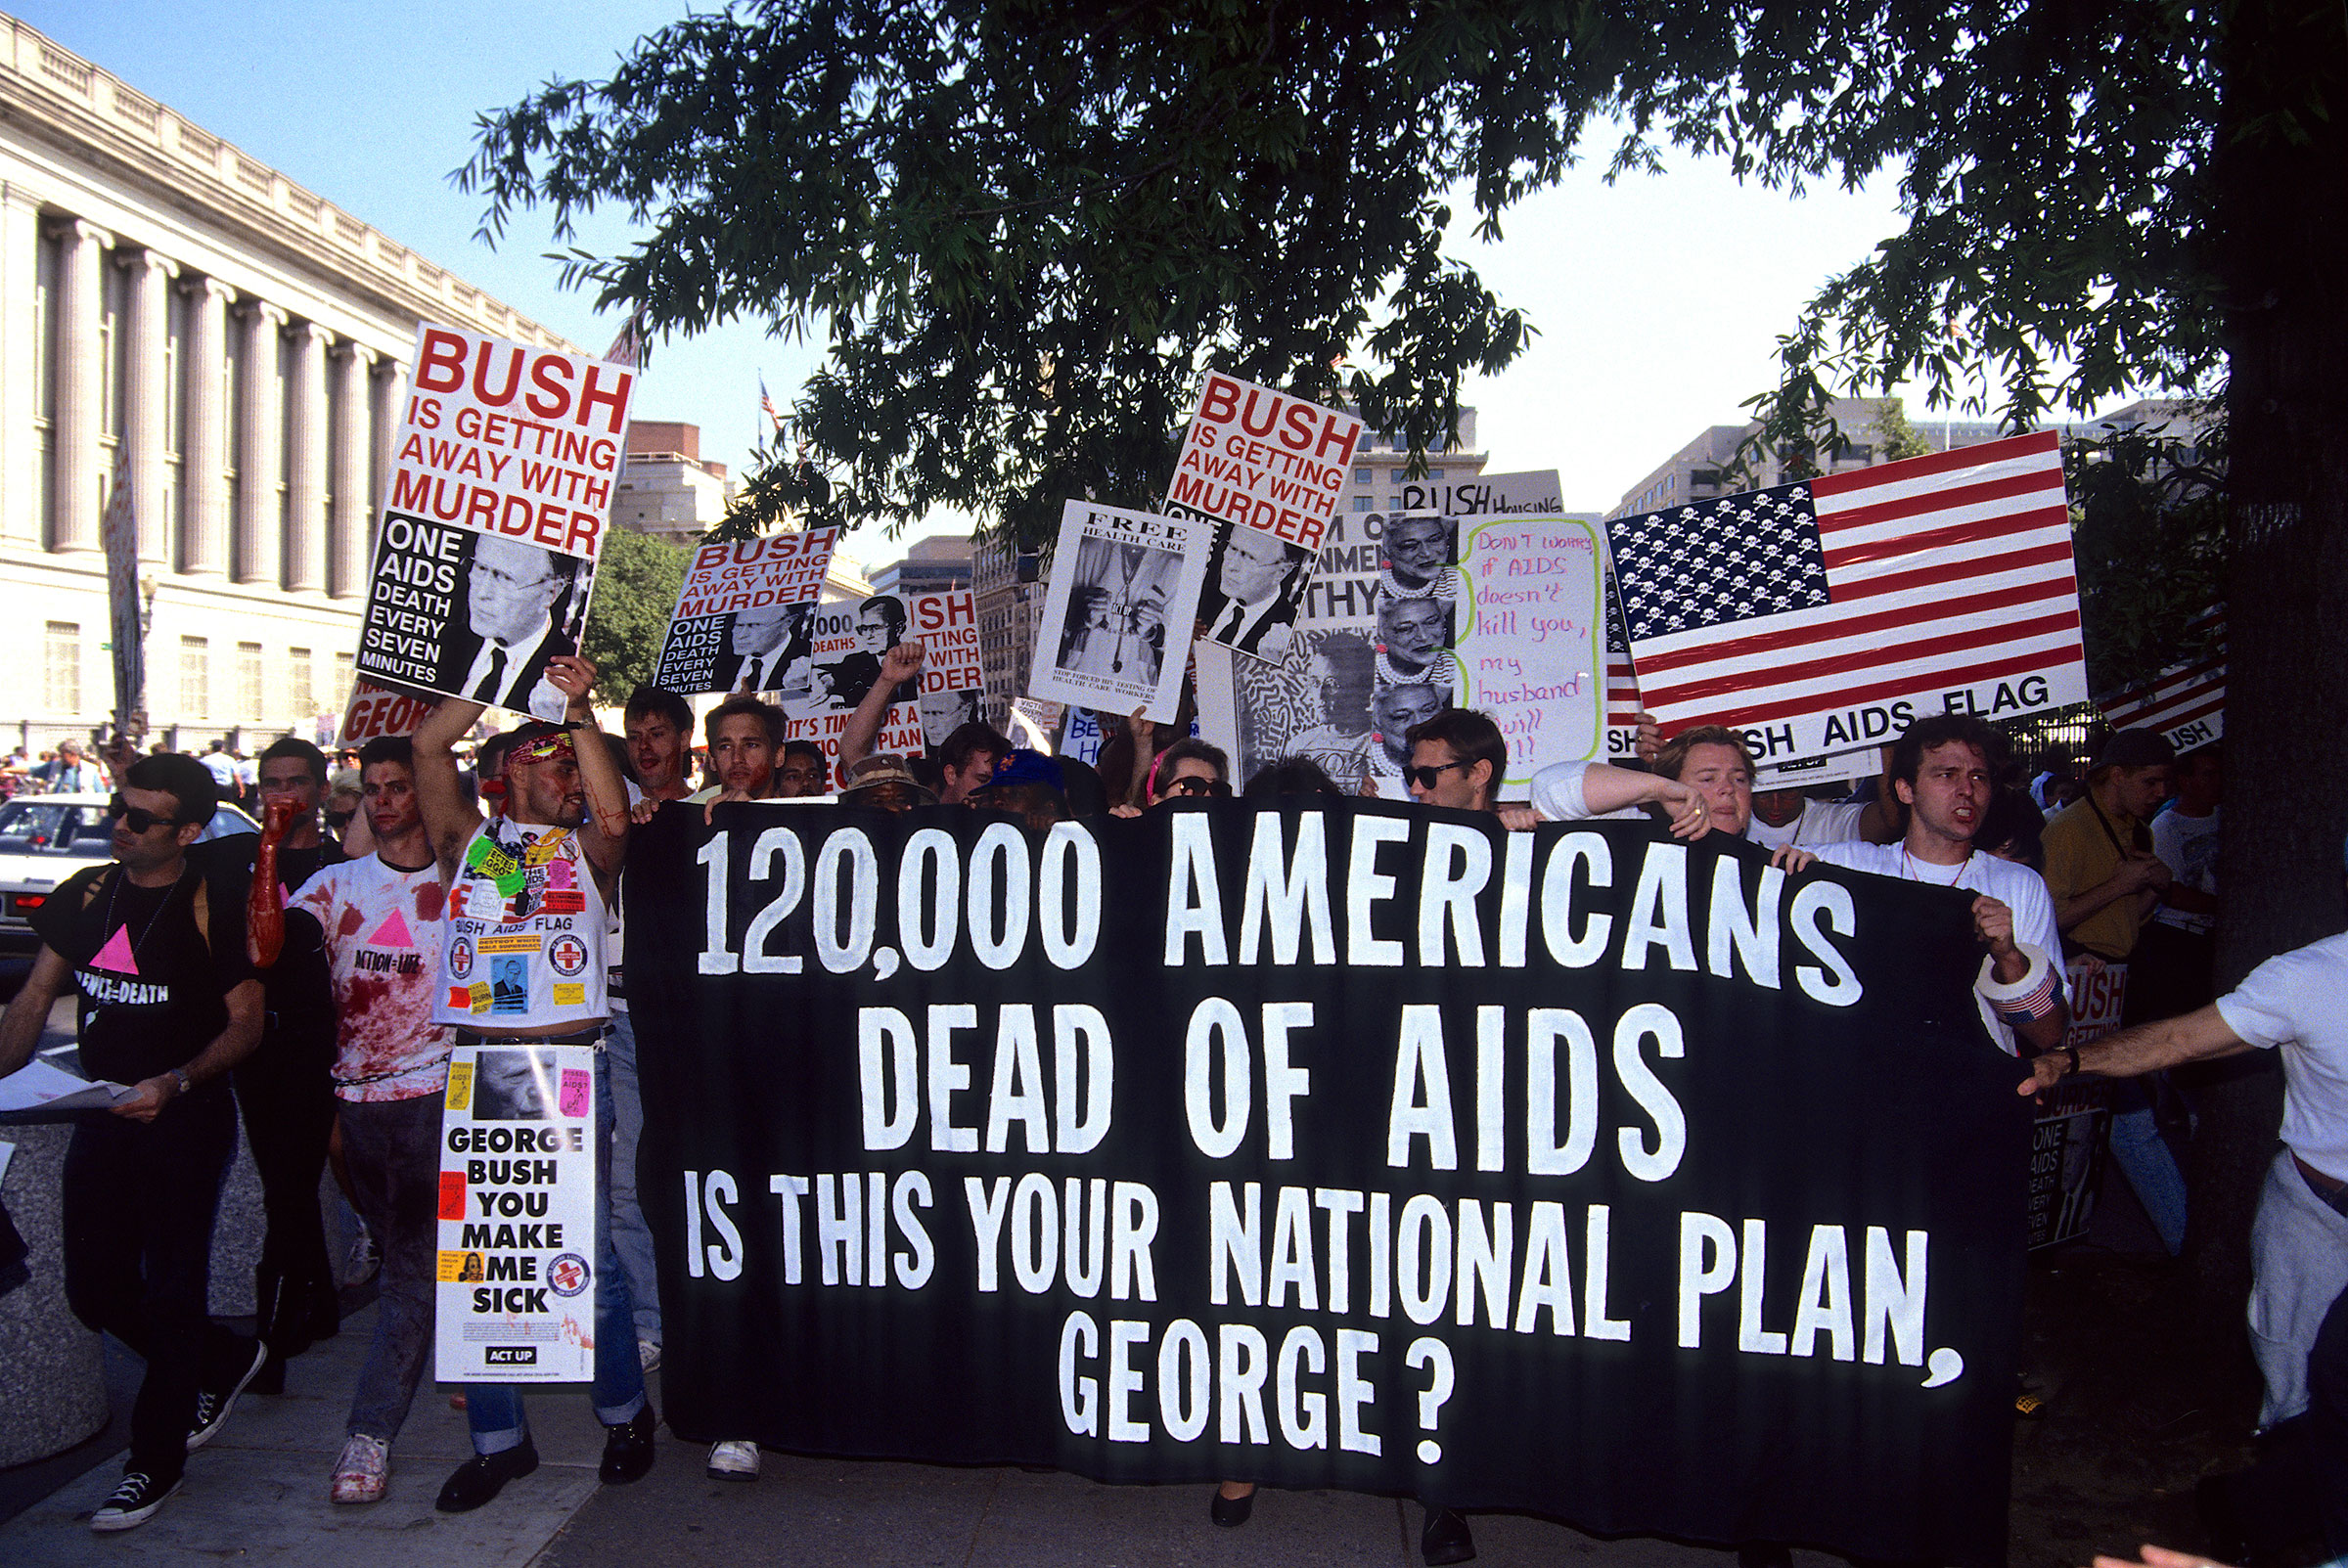 ACT UP activists protest near the White House in Washington, D.C., on Sept. 30, 1991. (Mark Reinstein—Corbis/Getty Images)